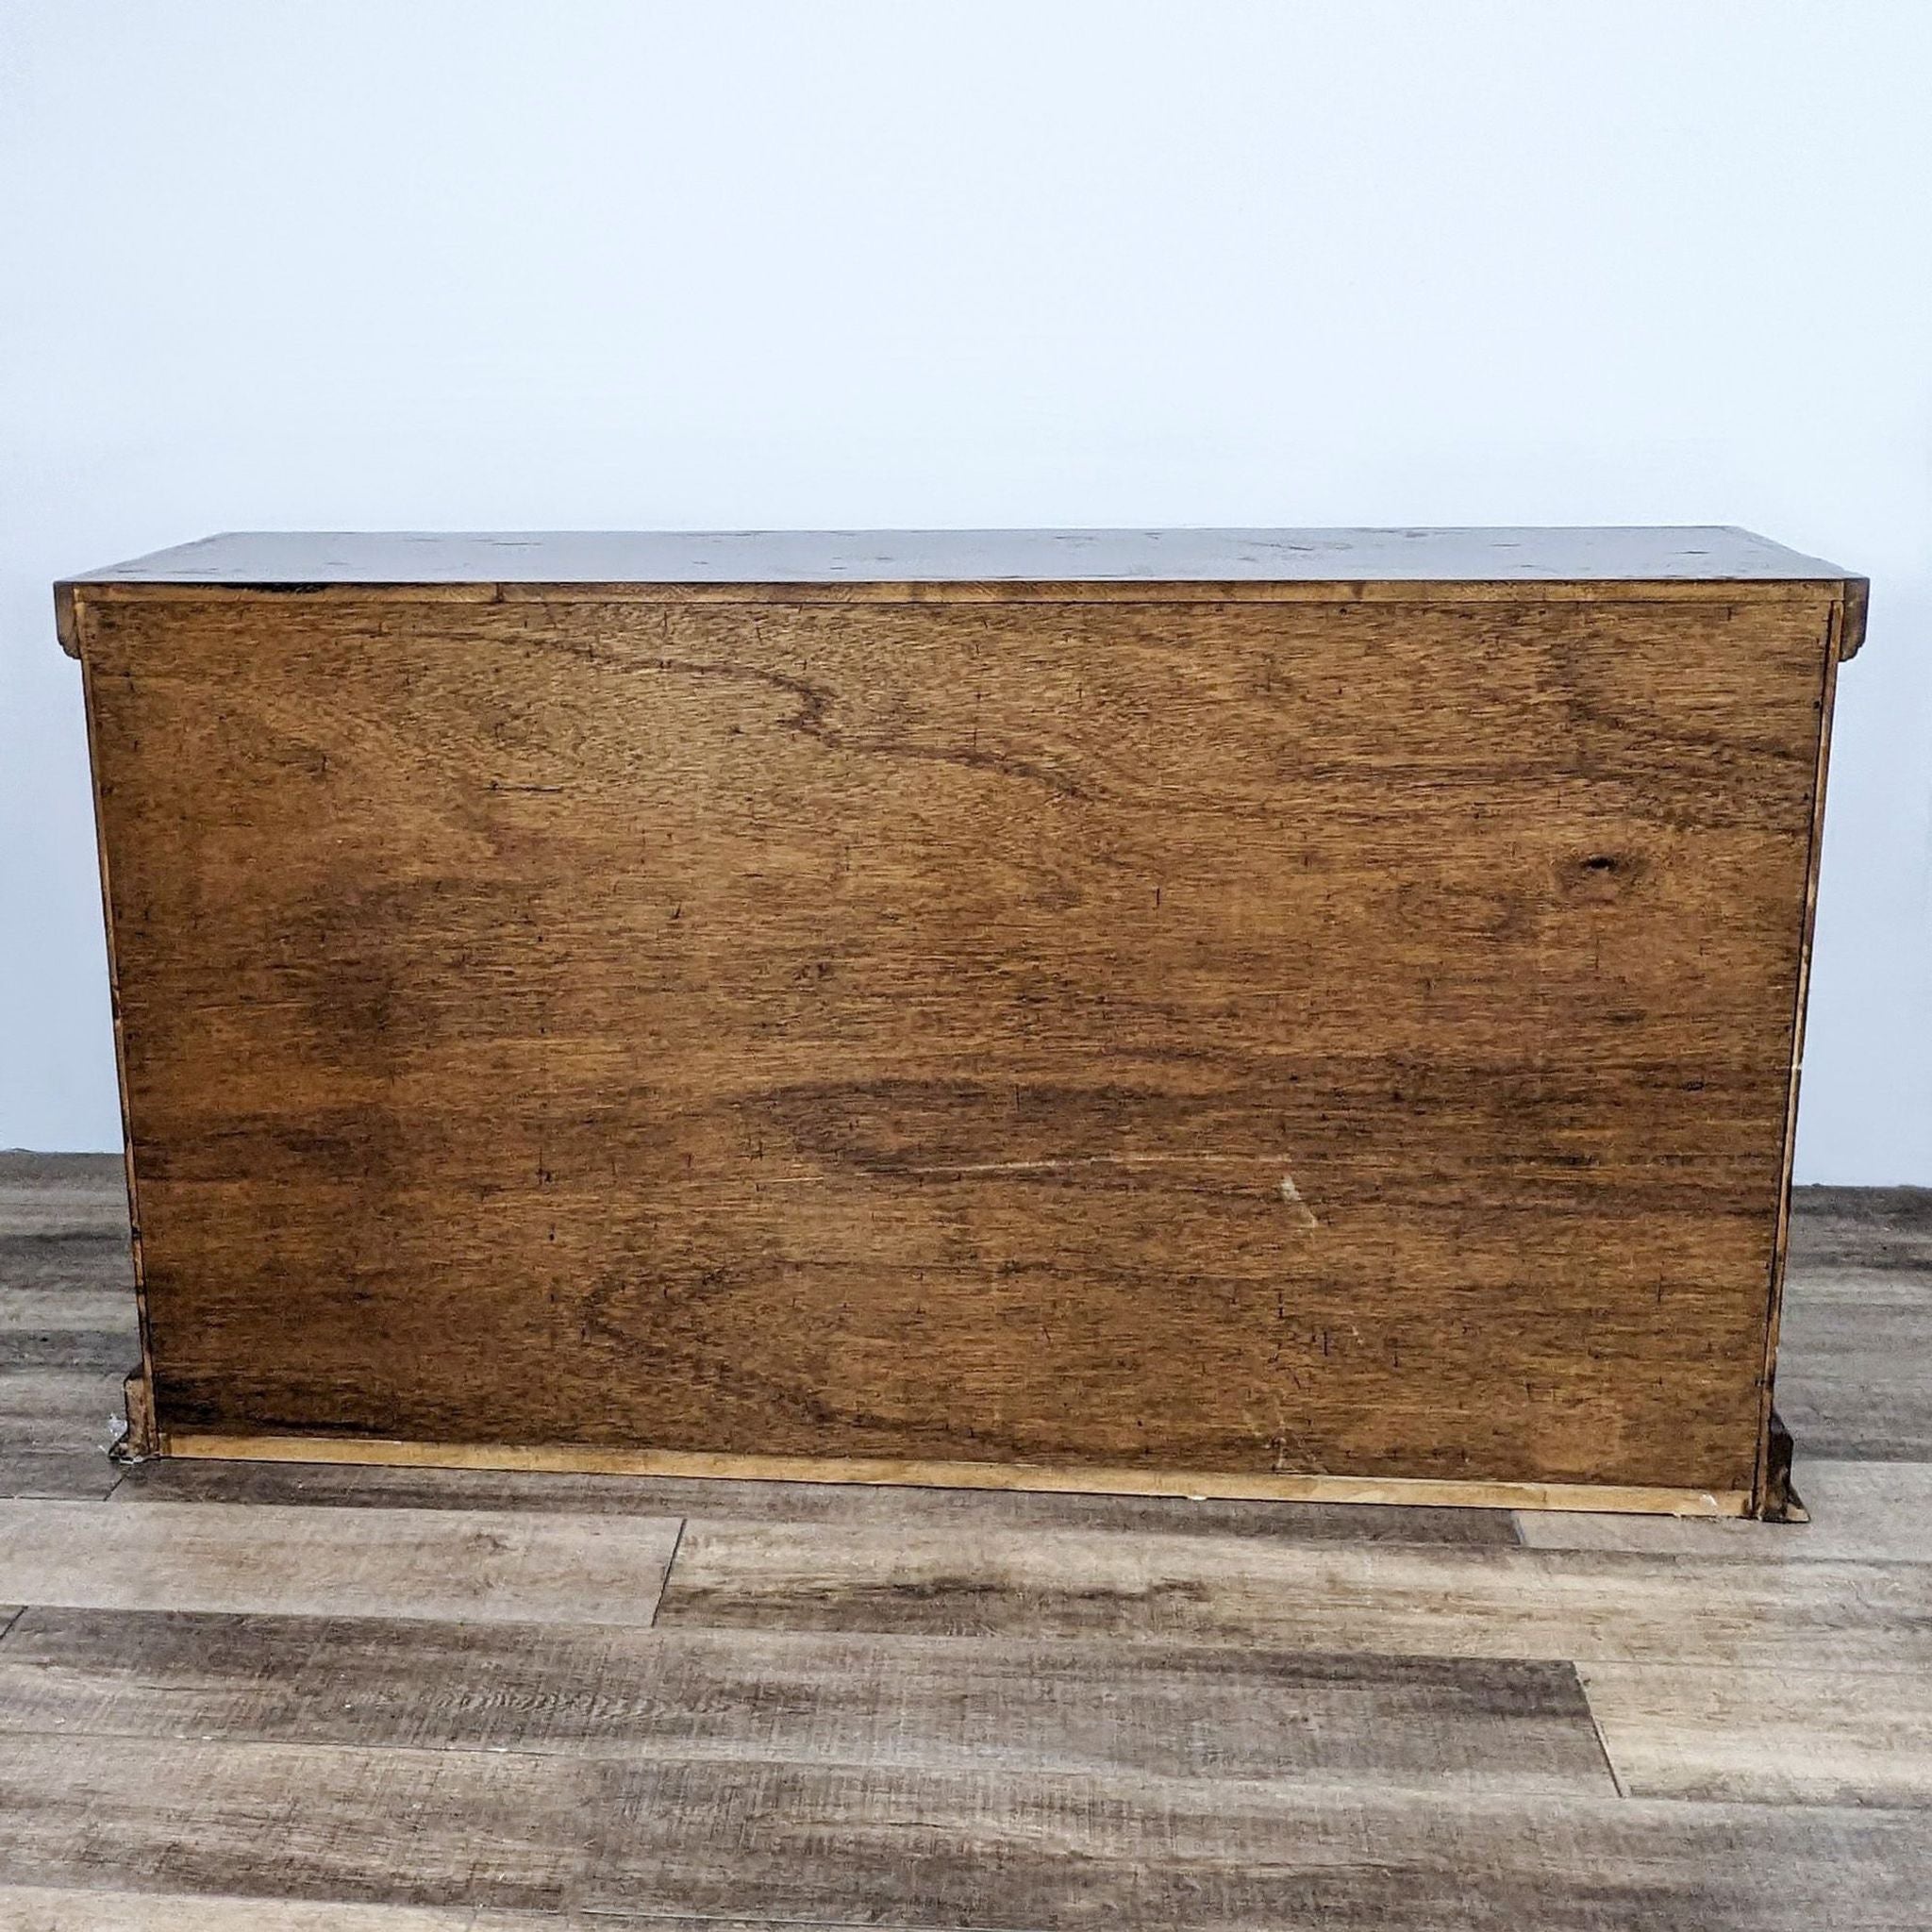 Rustic Walter of Wabash sideboard with raised panel doors and metal hardware against a wooden floor.